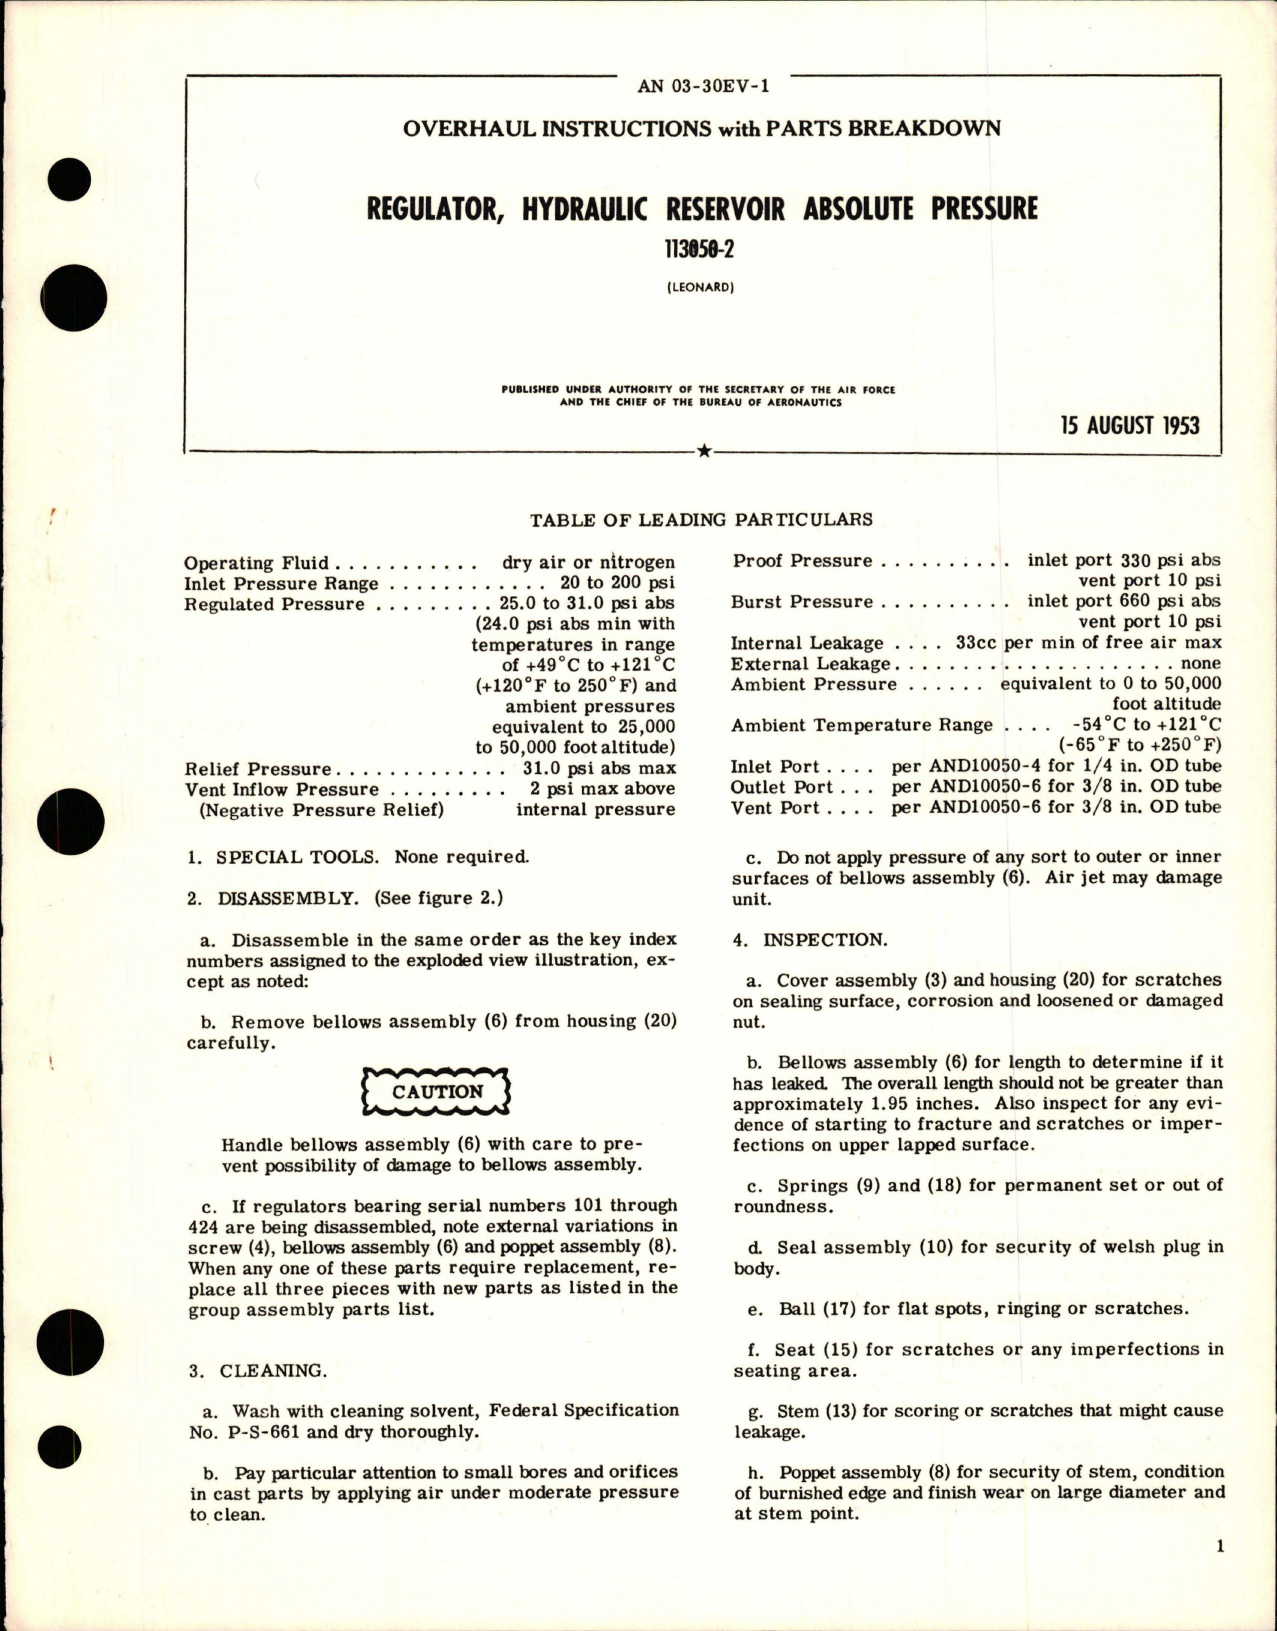 Sample page 1 from AirCorps Library document: Overhaul Instructions with Parts Breakdown for Hydraulic Reservoir Absolute Pressure Regulator - 113050-2 